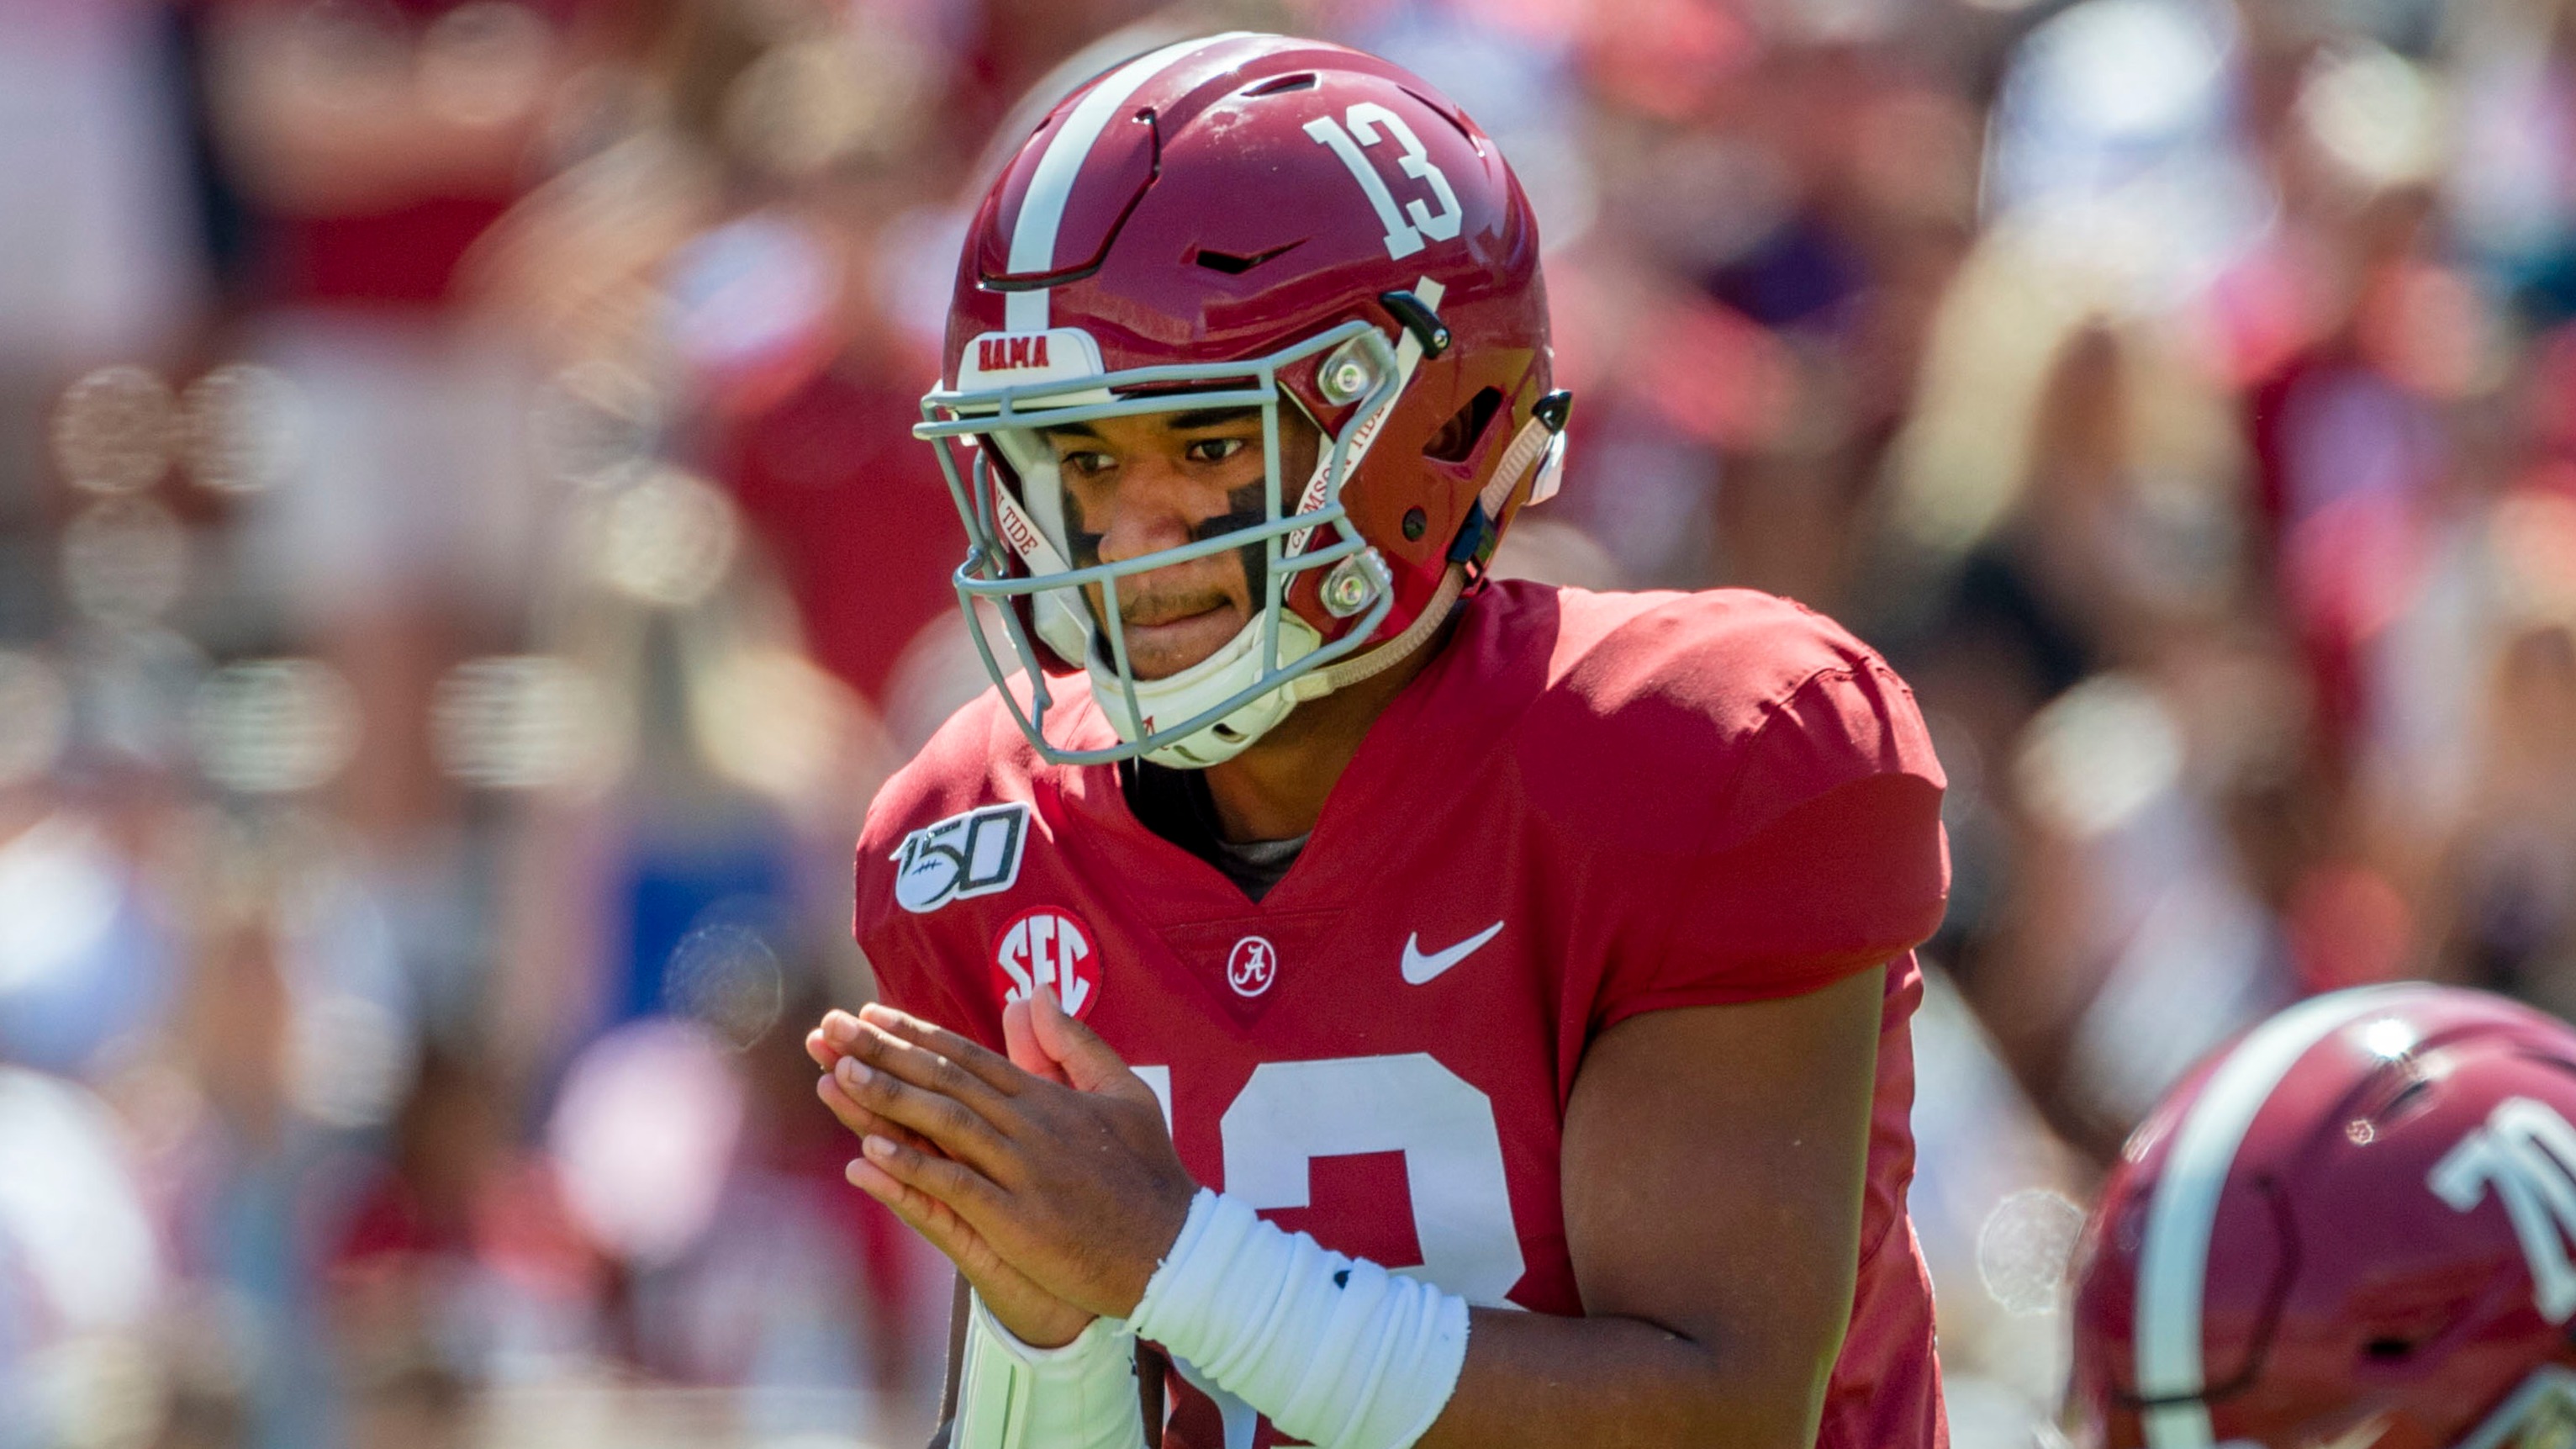 NFL or college? Alabama's Tagovailoa still weighing options